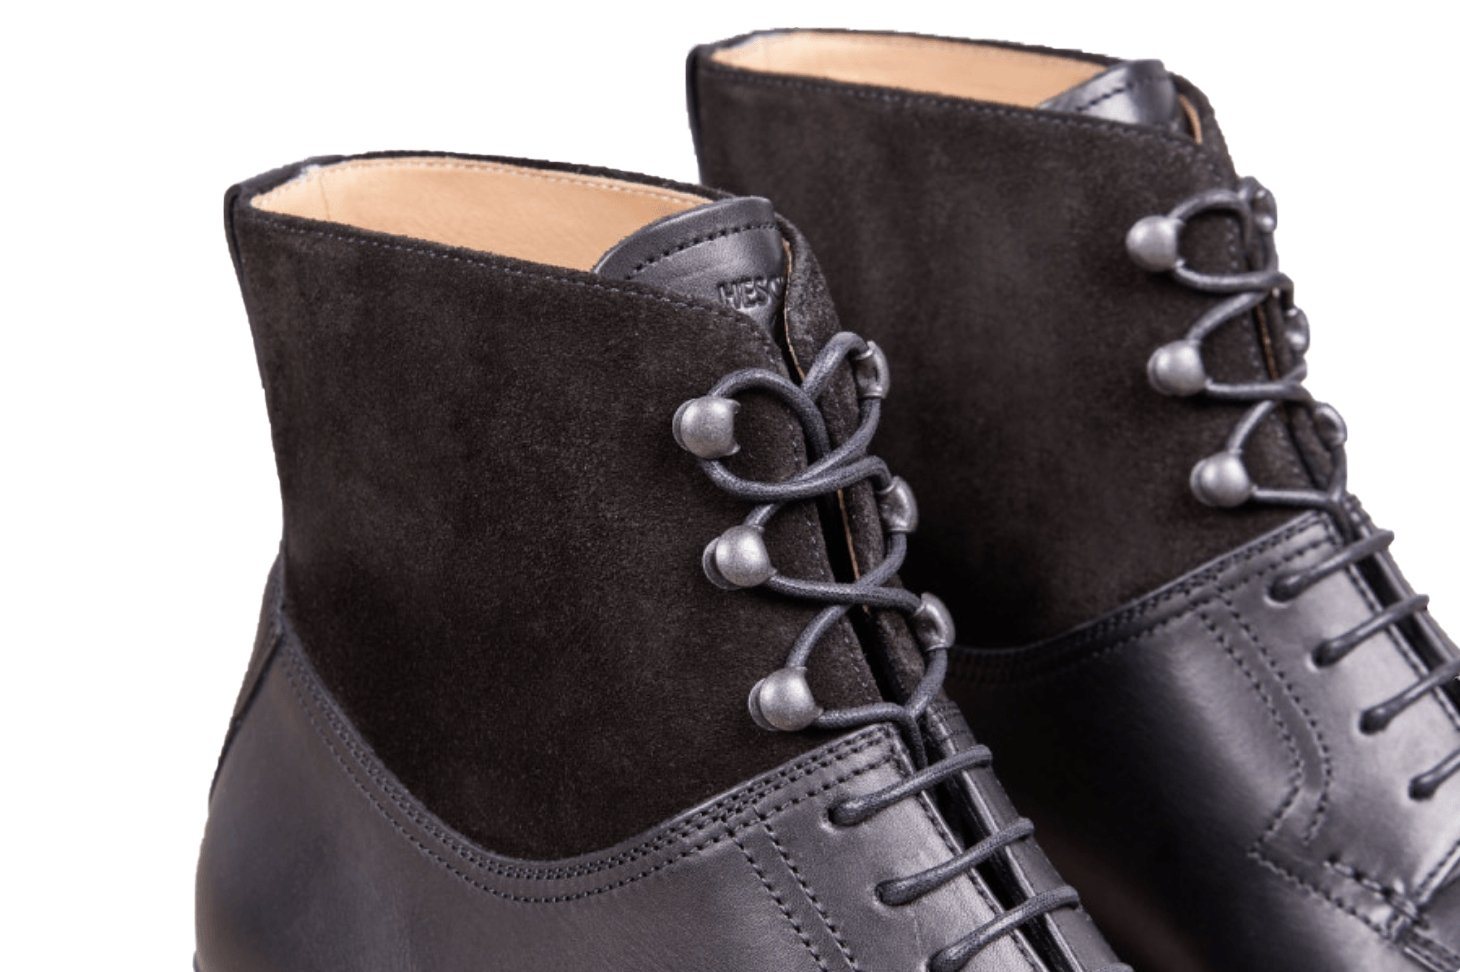 HESCHUNG - GINKGO | Leather Boot with Suede Collar | Black - HANSEN Garments